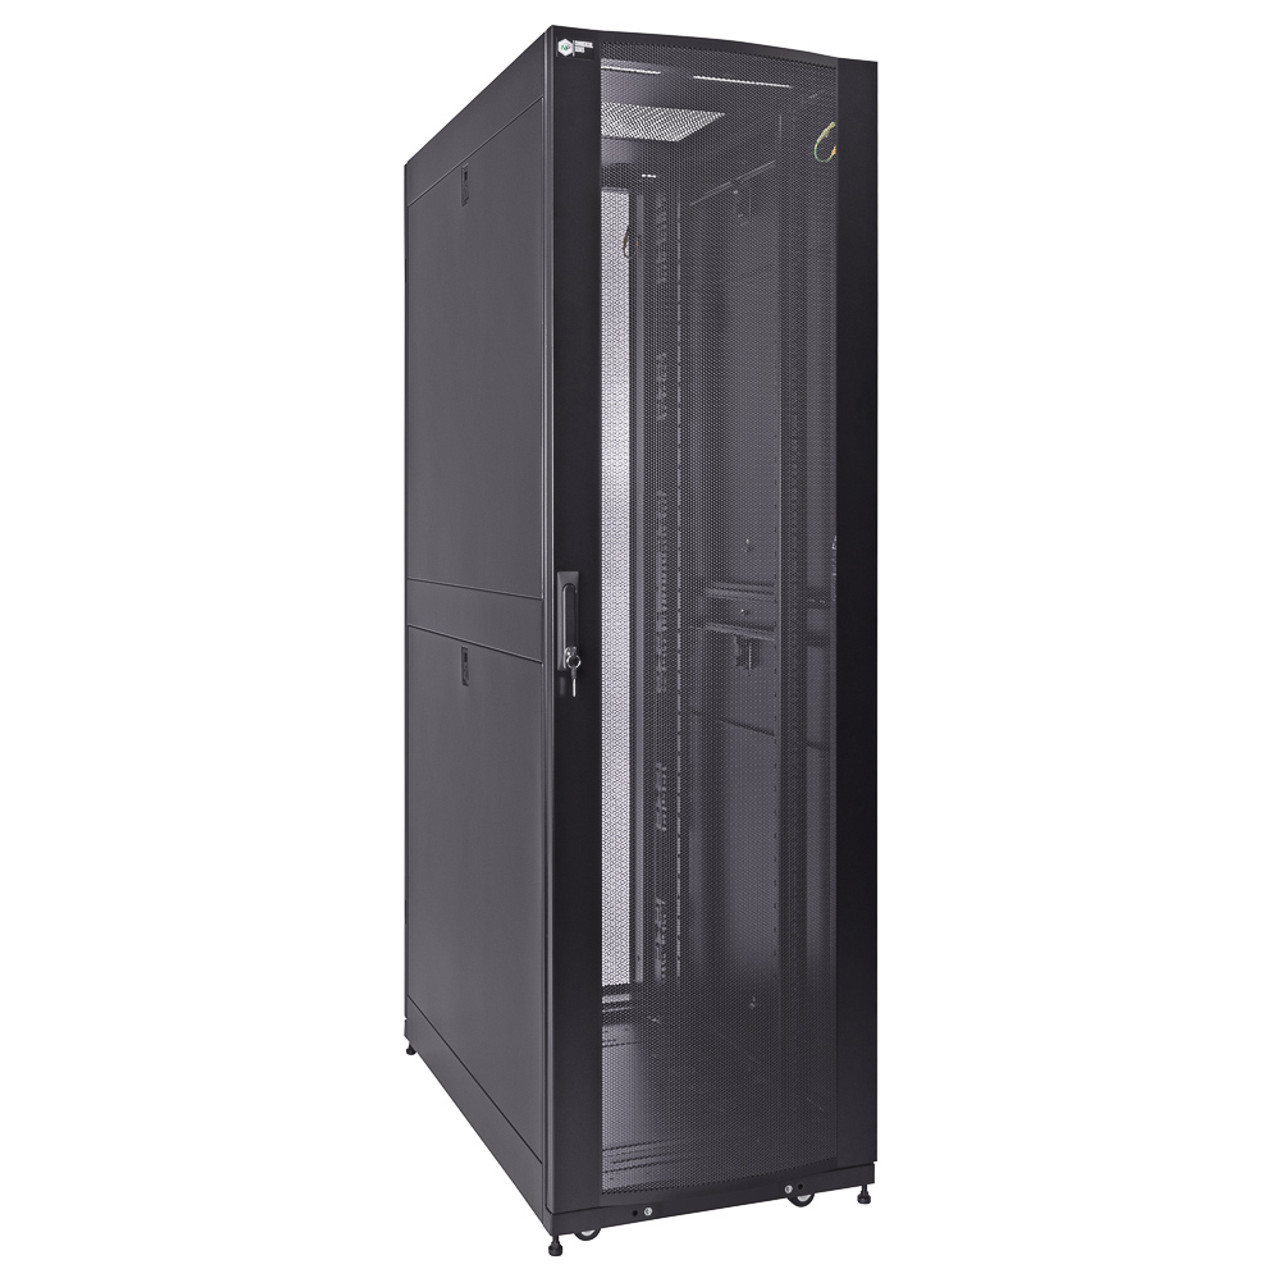 Server Racks: How They Protect Your Data and Equipment from Threats